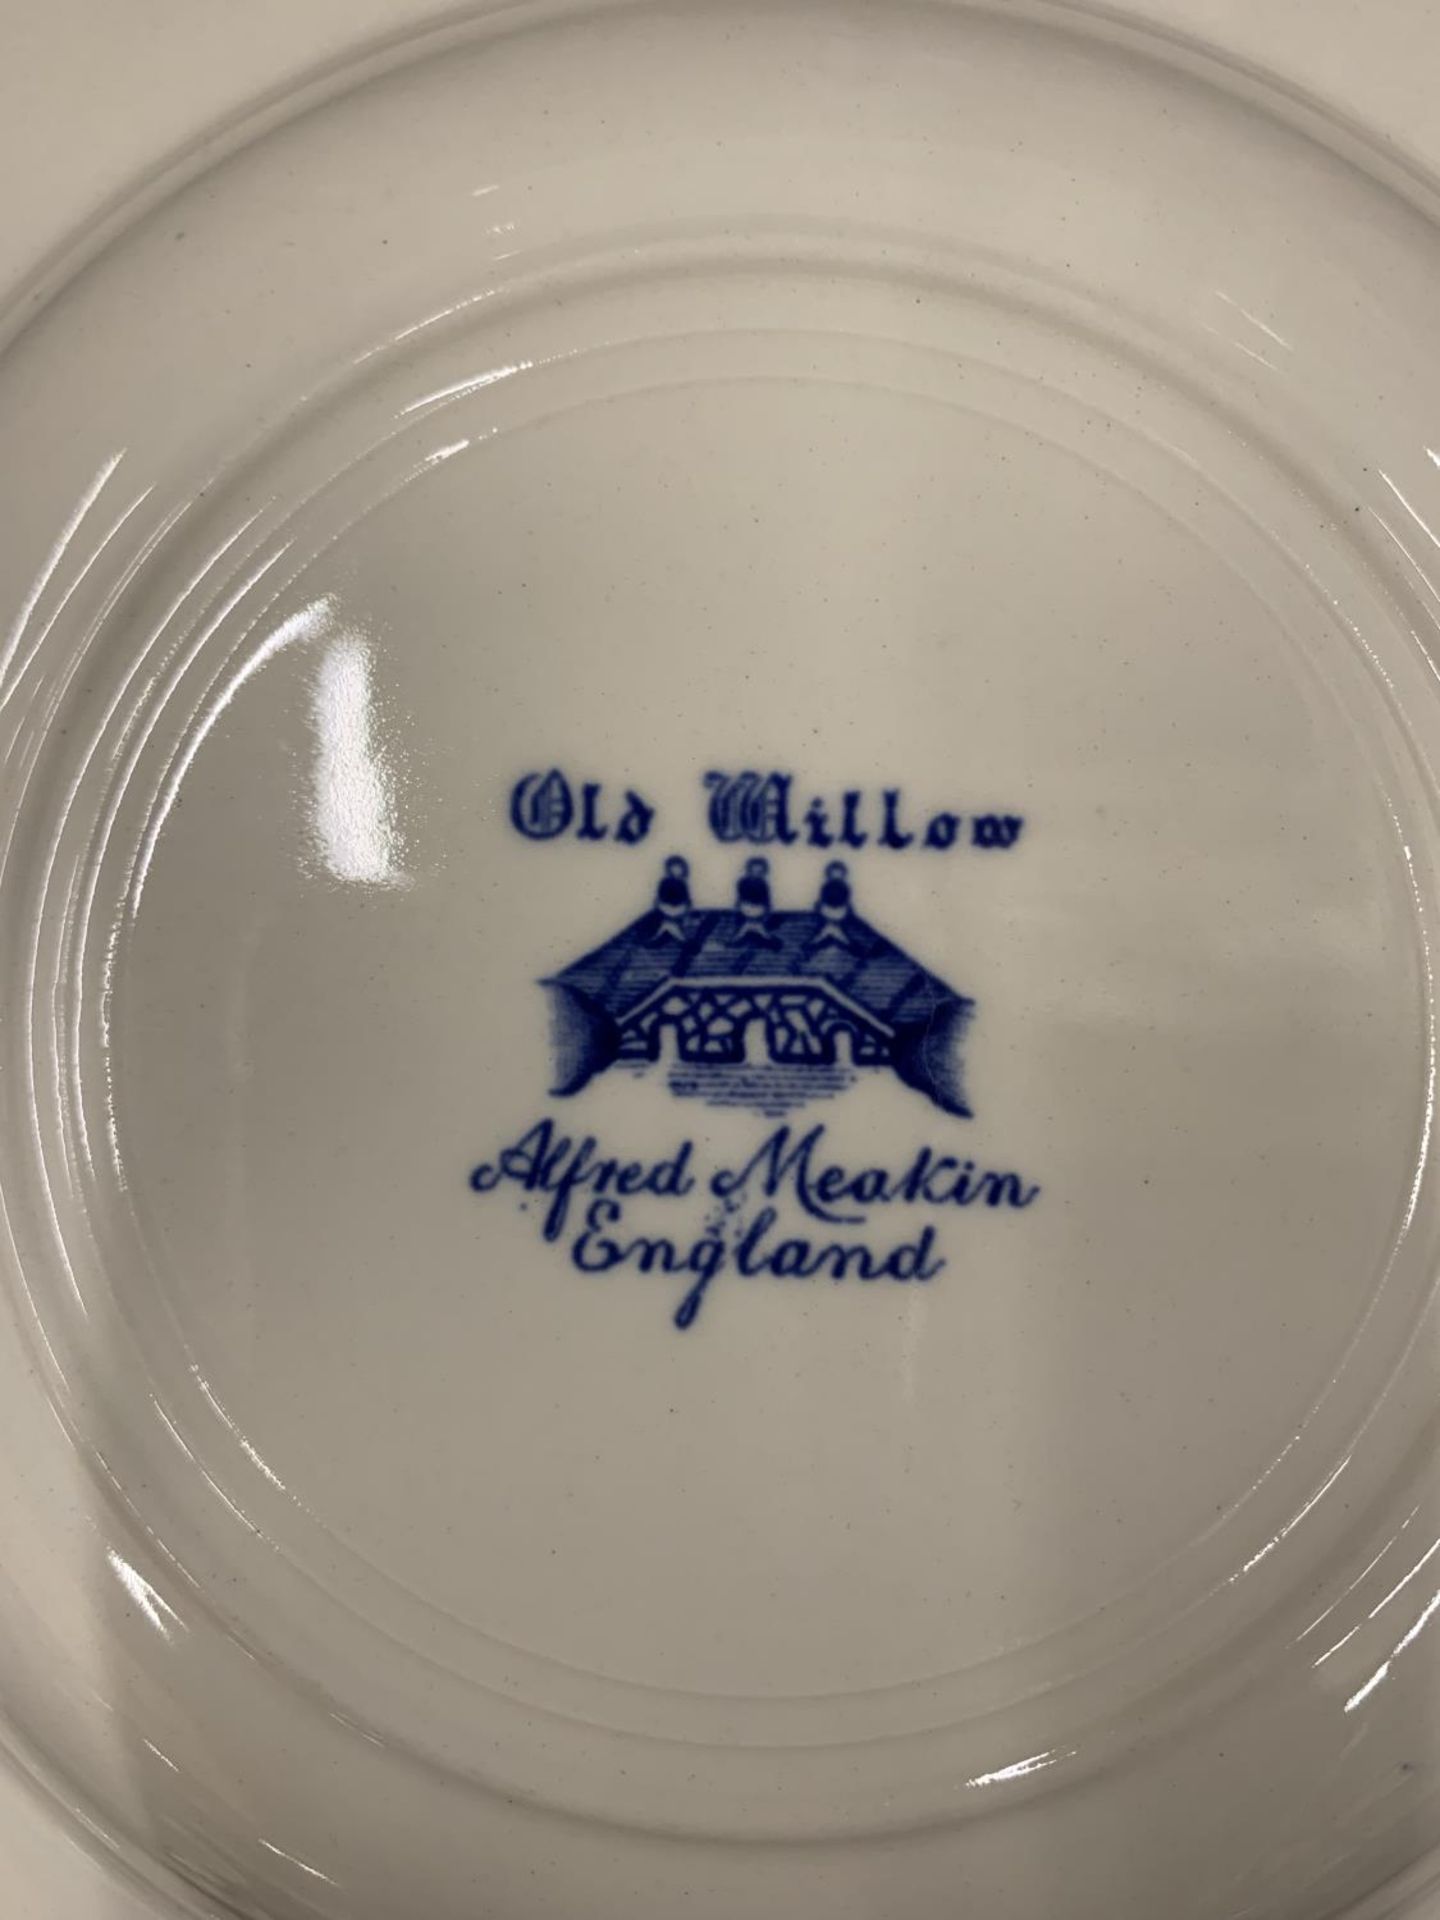 A QUANTITY OF ALFRED MEAKIN 'OLD WILLOW' BLUE AND WHITE PLATES AND BOWLS - Image 3 of 3